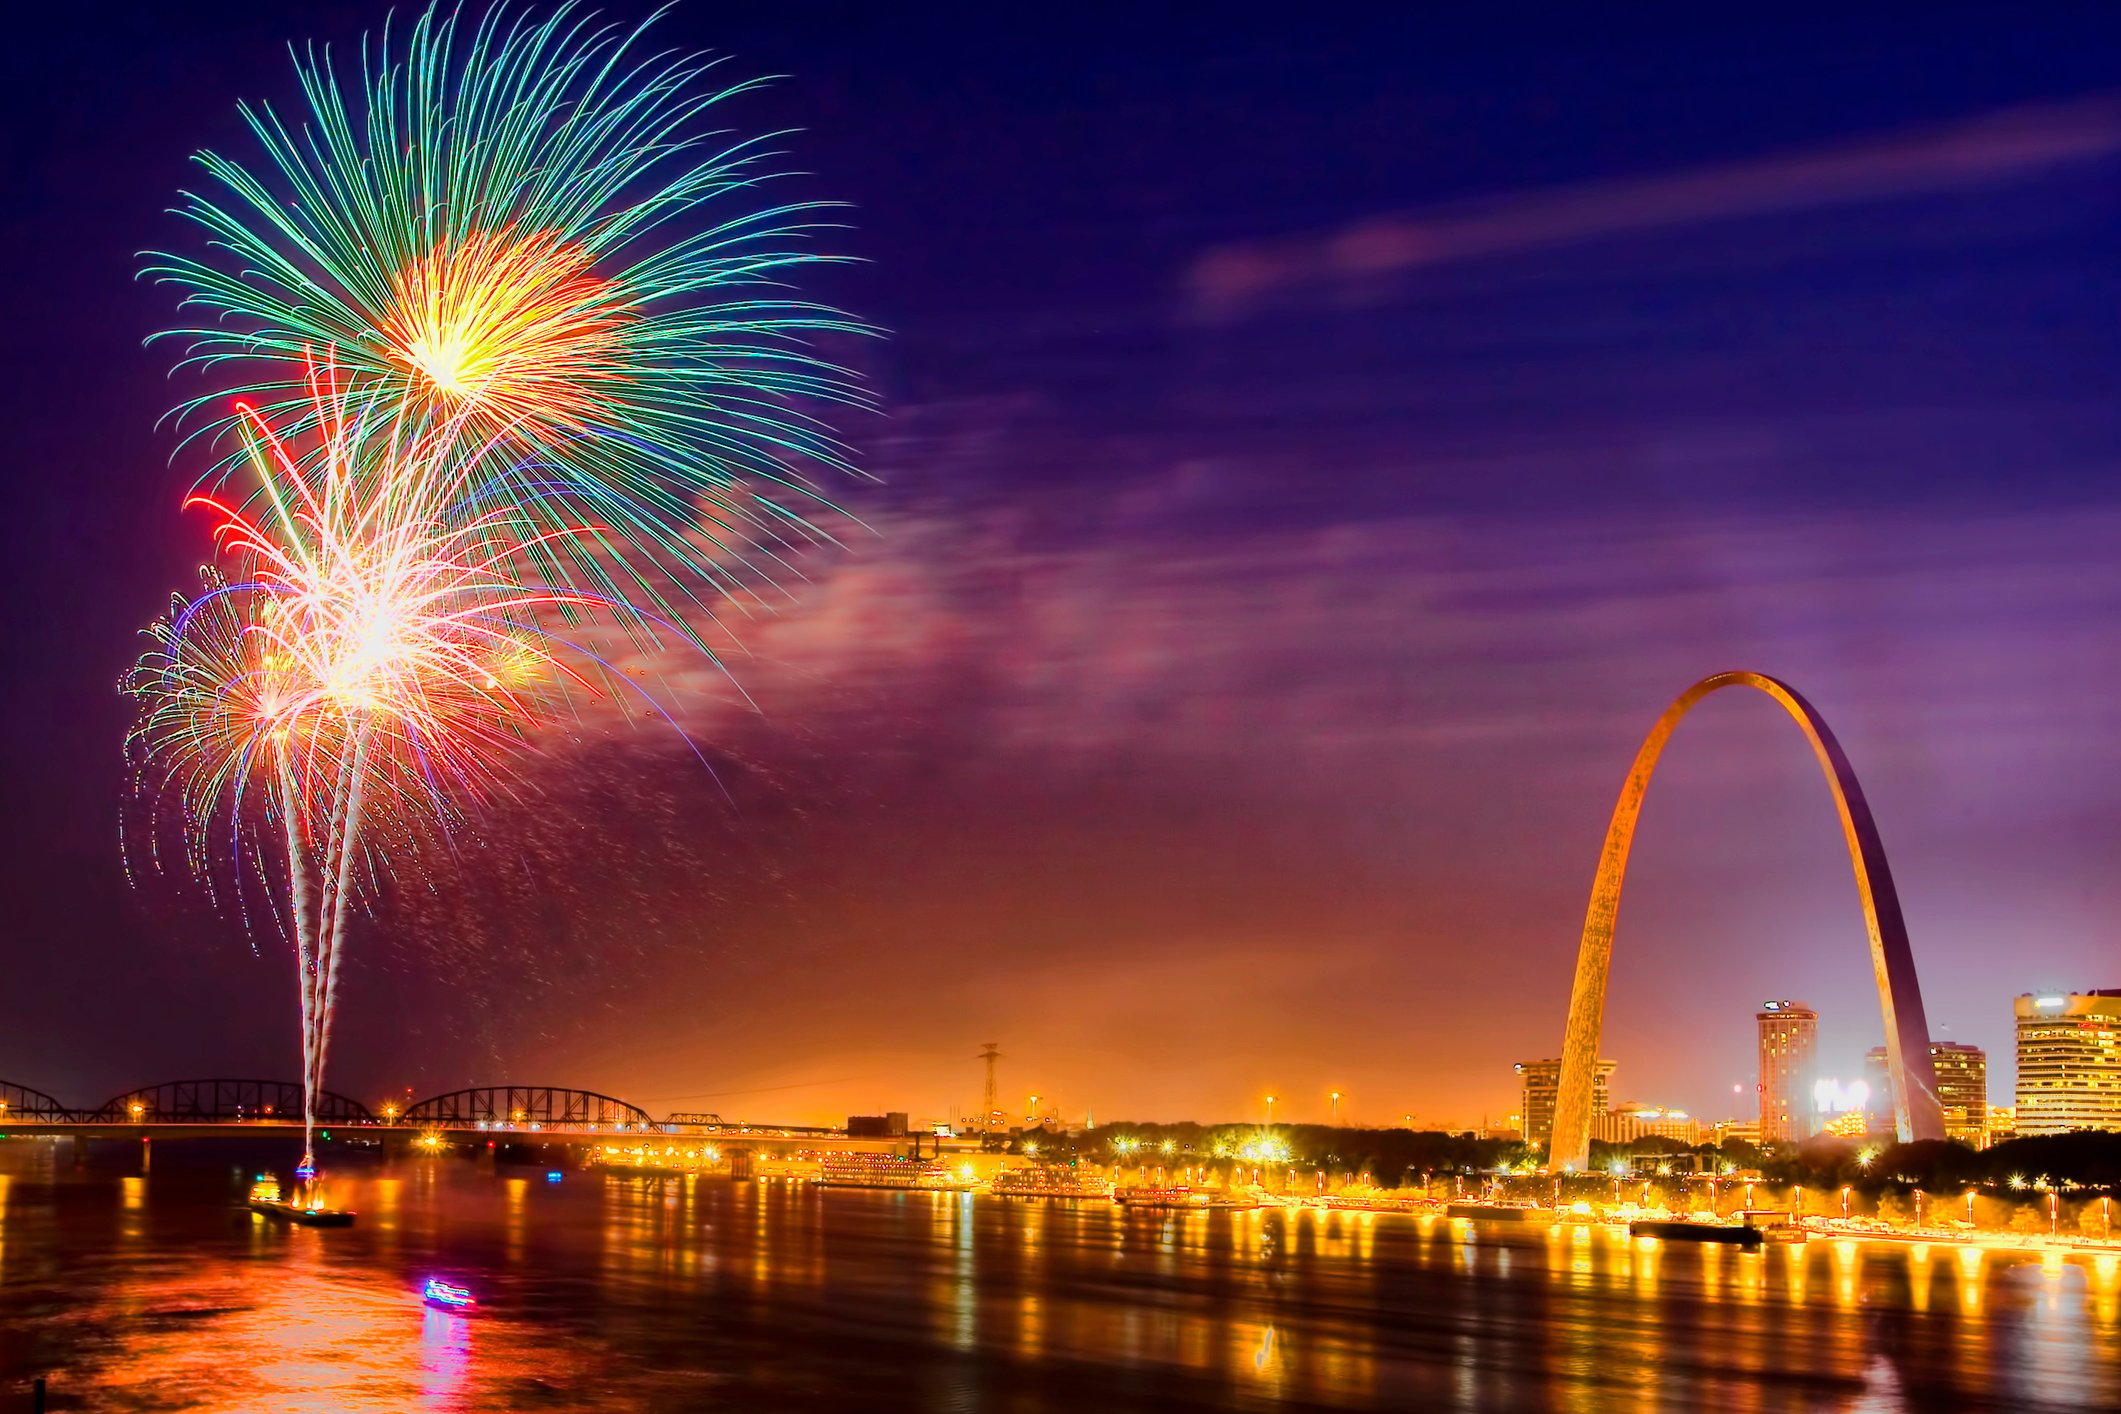 Fireworks on the Mississippi River at night with the Arch in the background